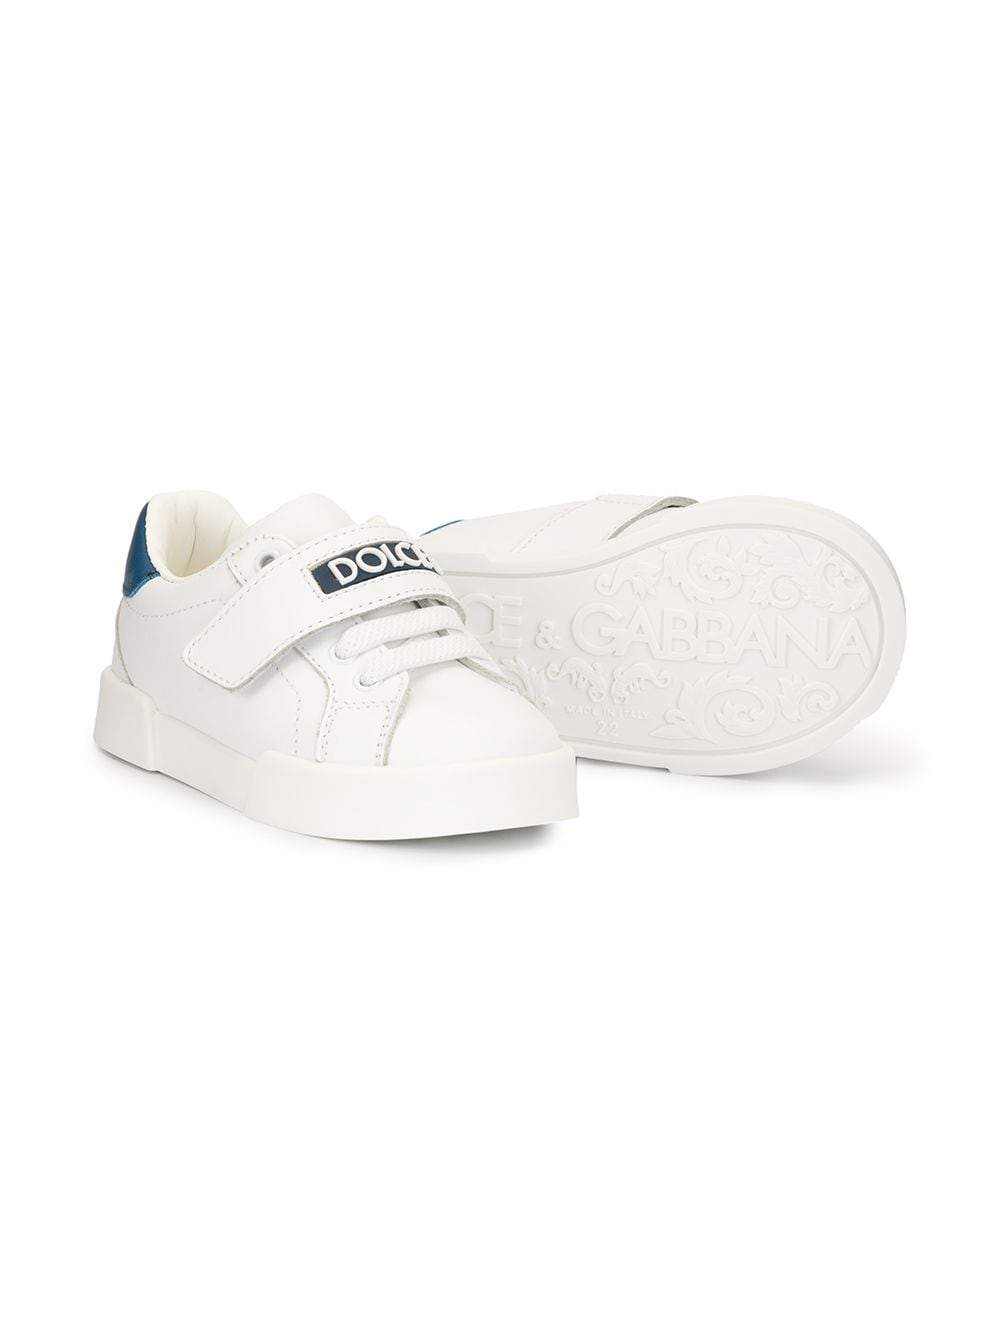 Shop Dolce & Gabbana Kids lace-up sneakers with Express Delivery - FARFETCH